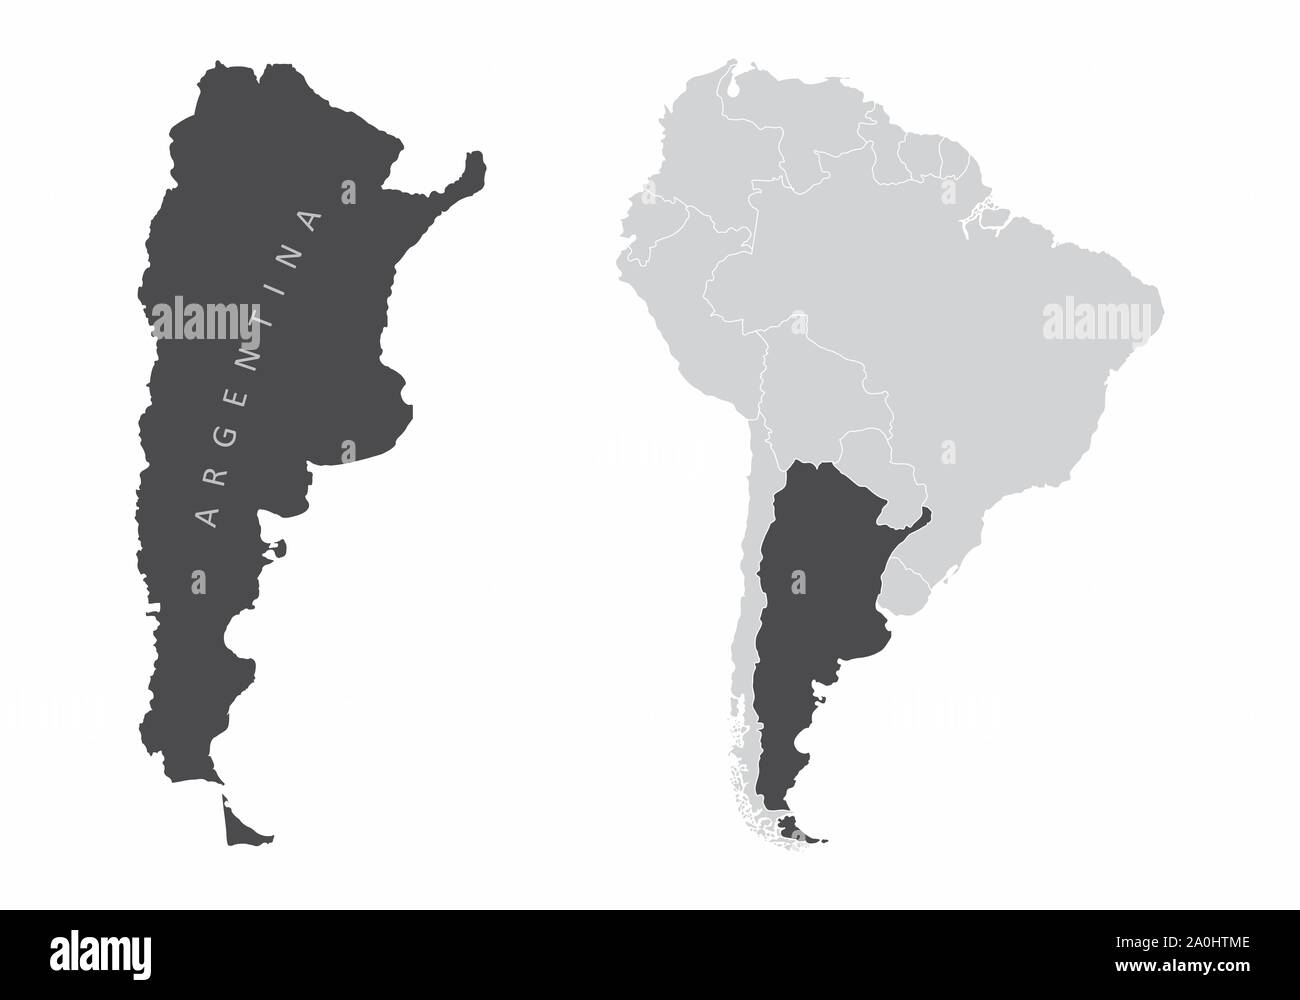 The Argentina map and its location in South America Stock Vector